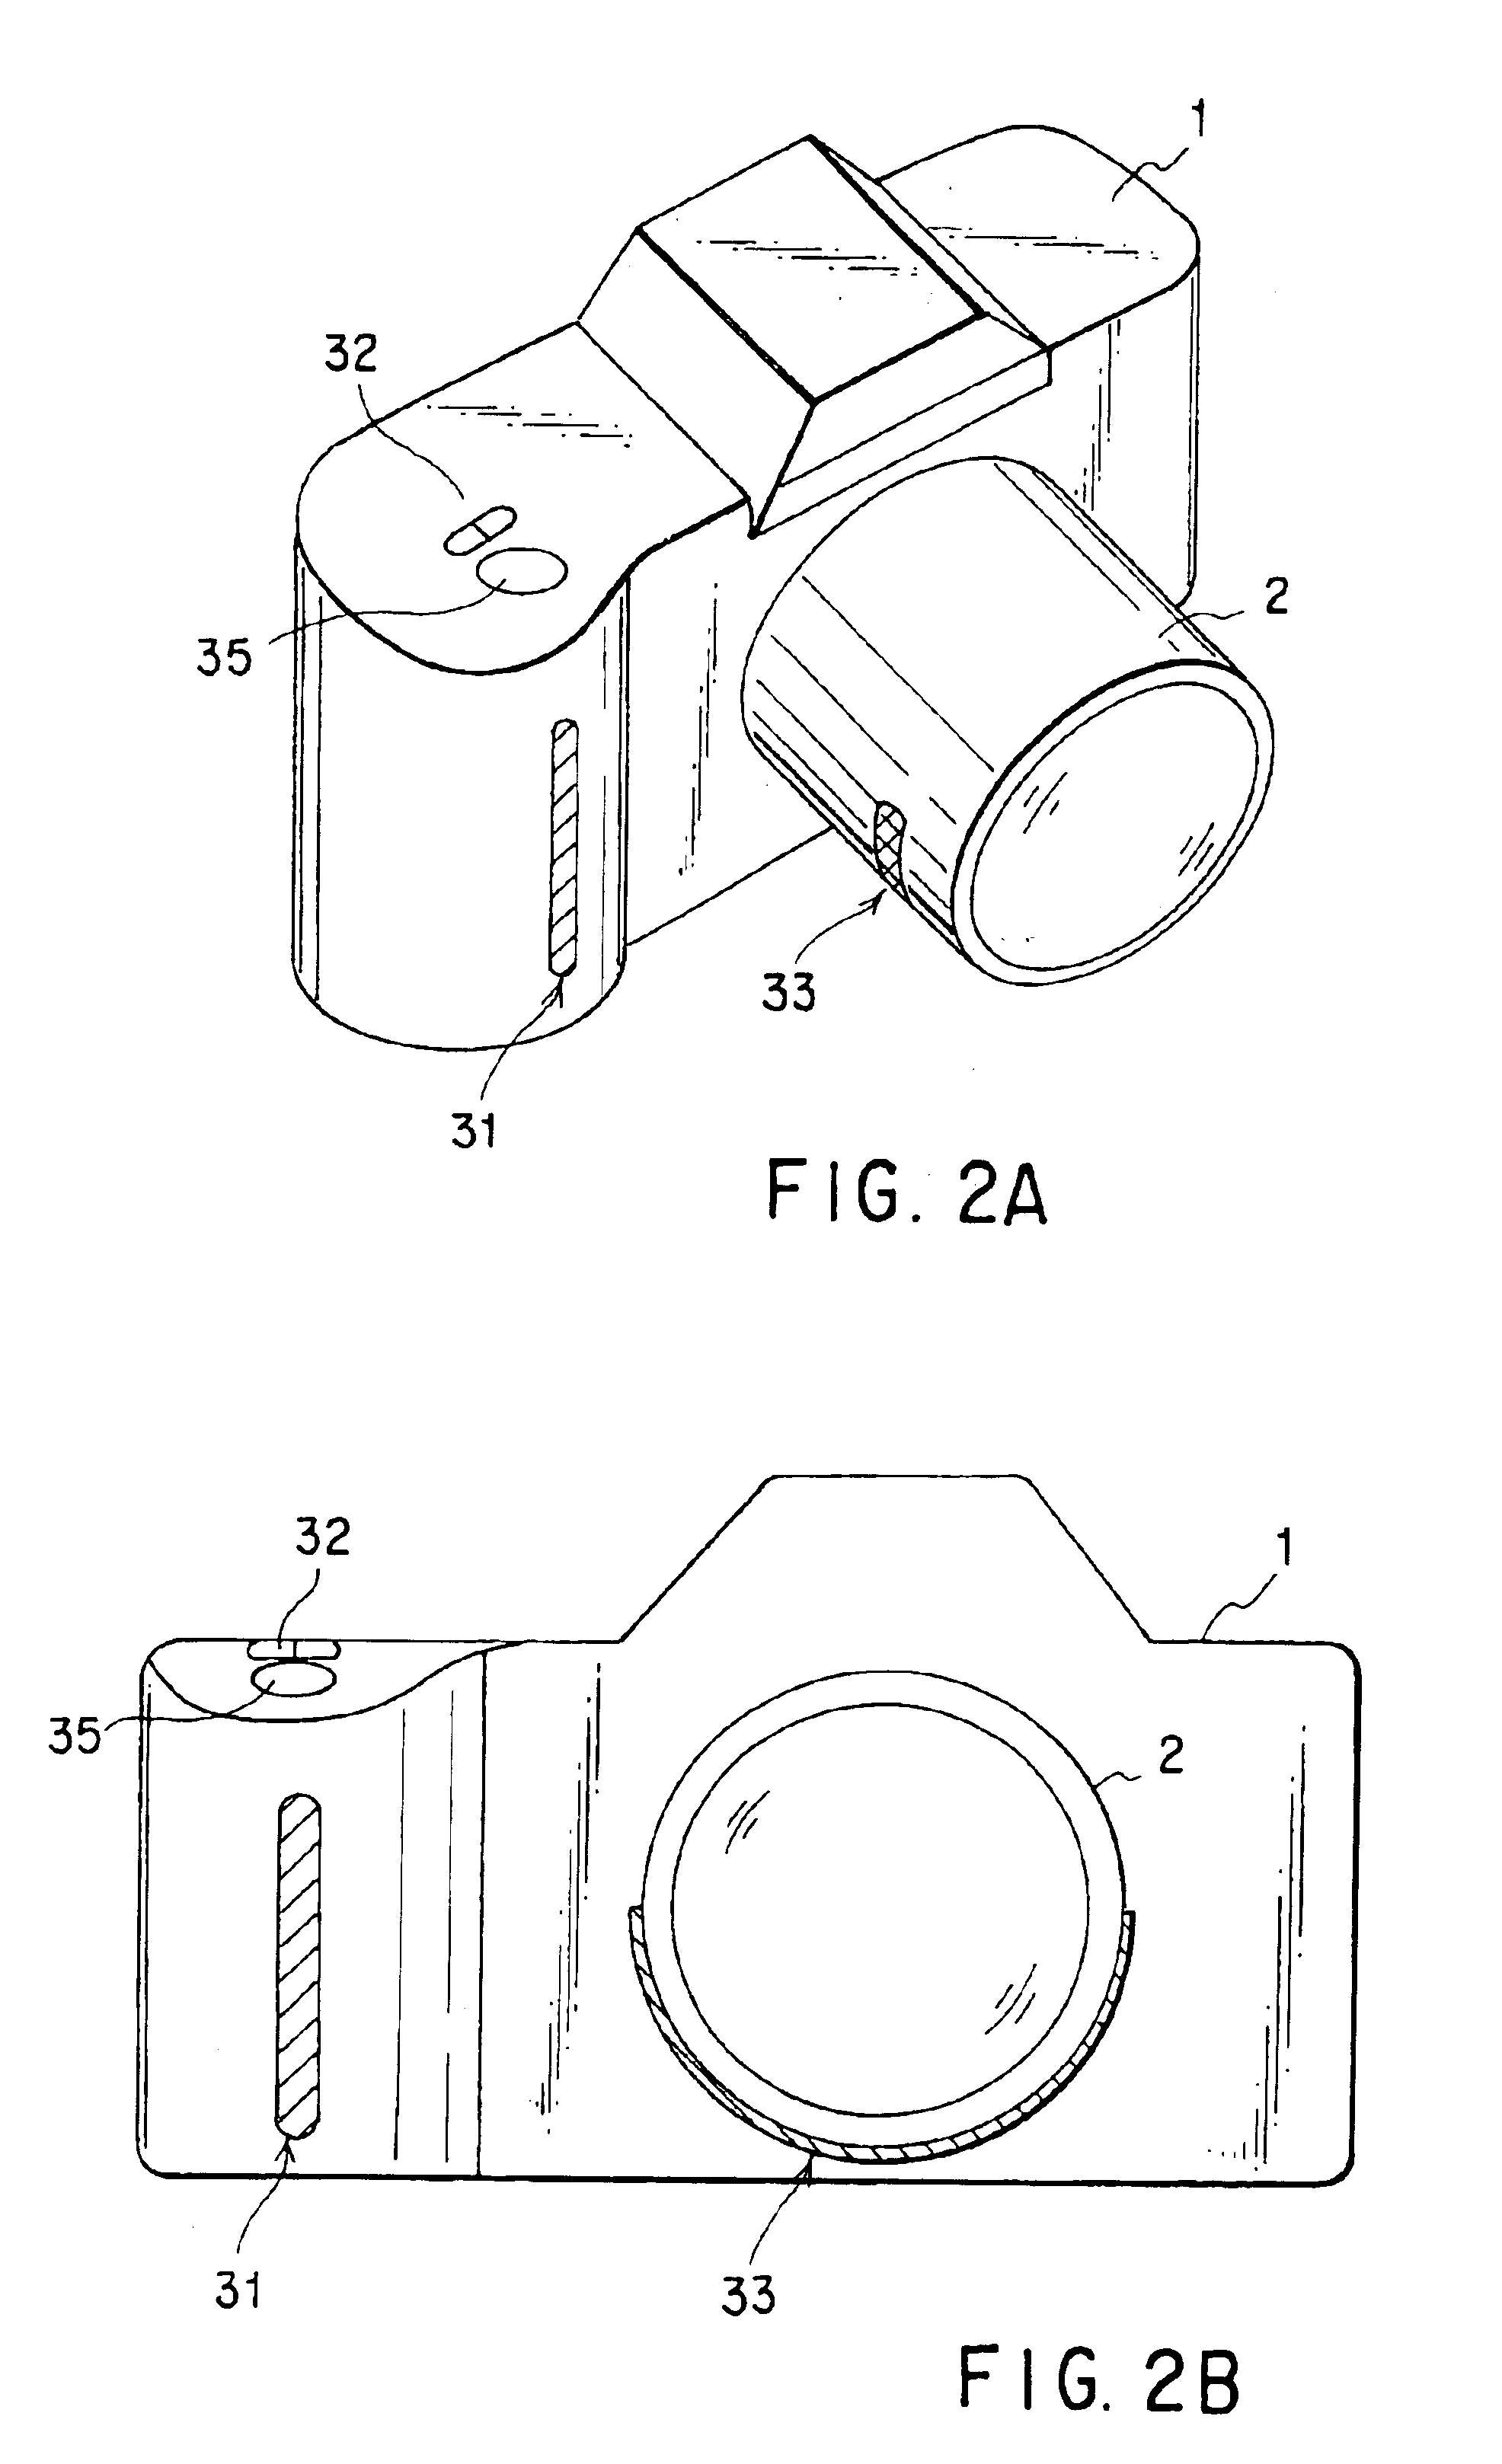 Electronic camera having a standby mode for reducing delays in image pickup